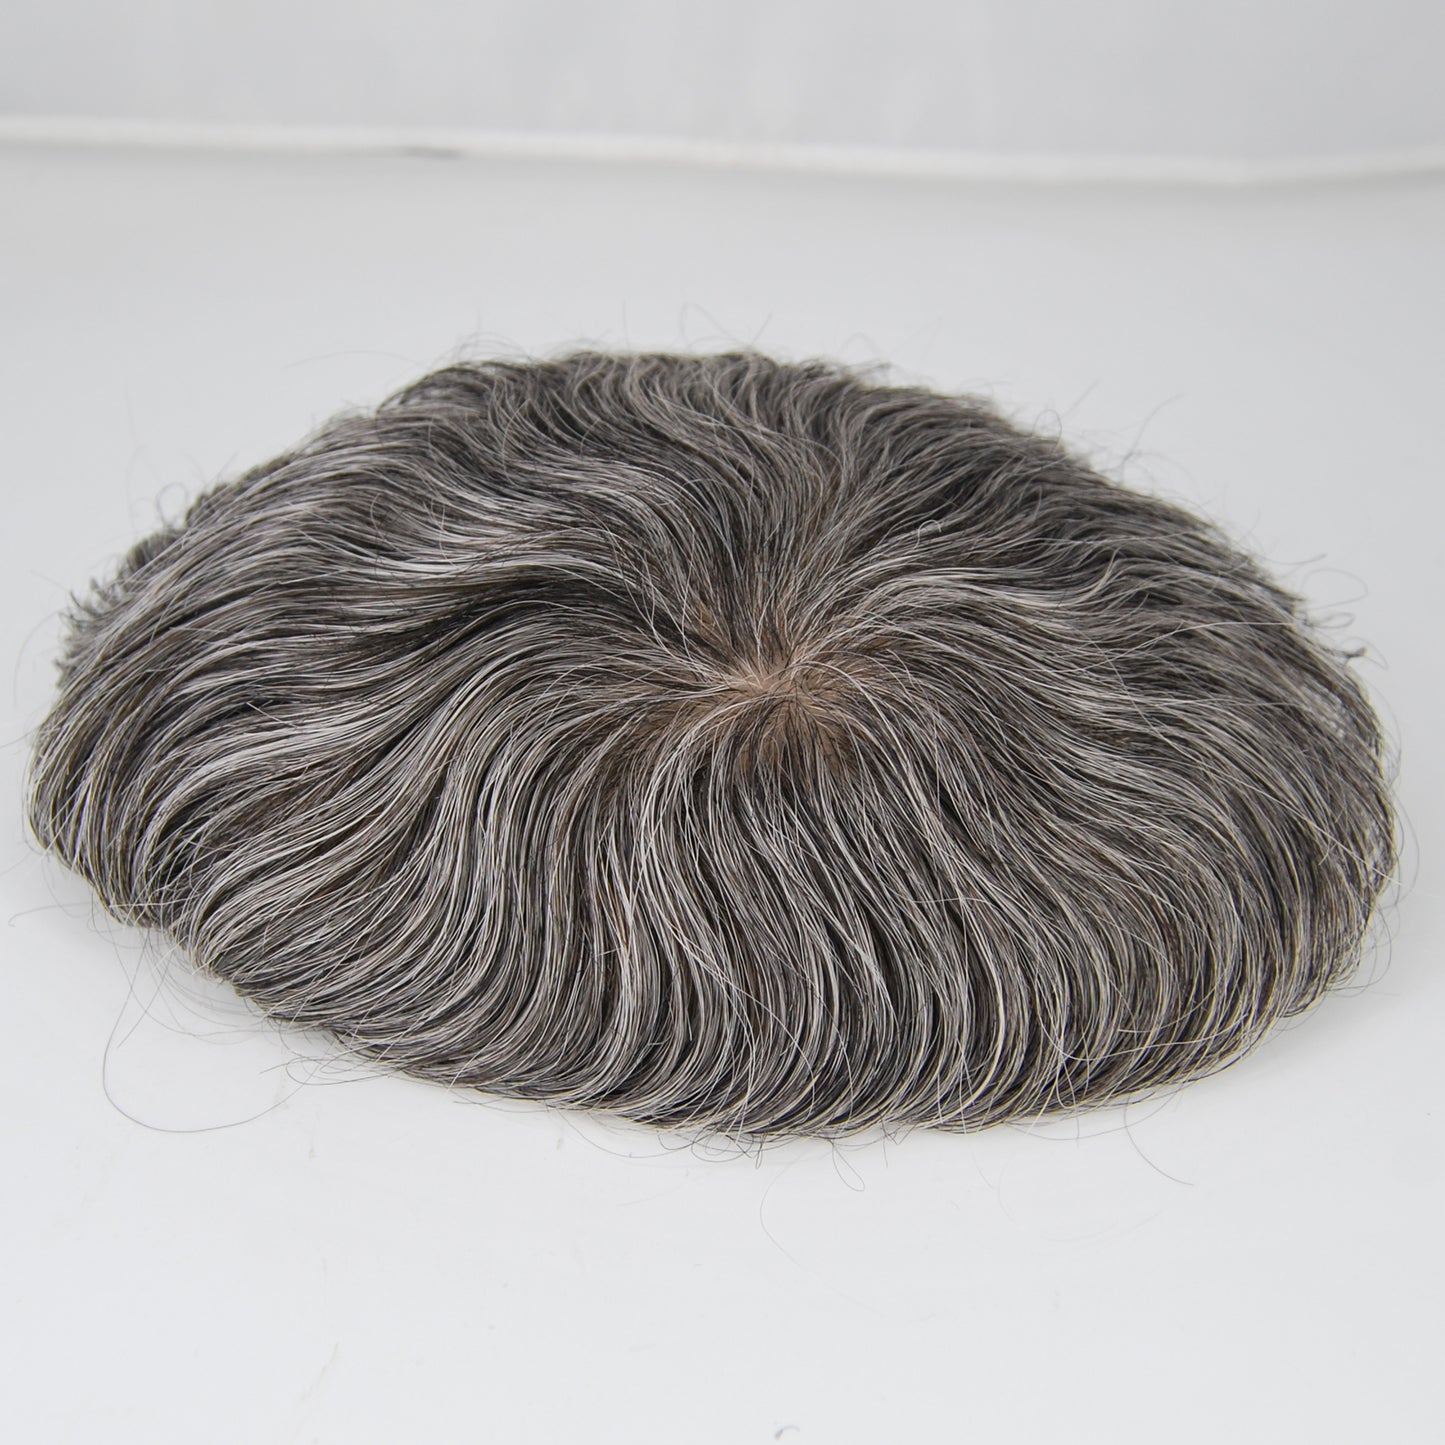 Clearance toupee silk base with PU around hair system #1 jet black mixed 50% grey hair system